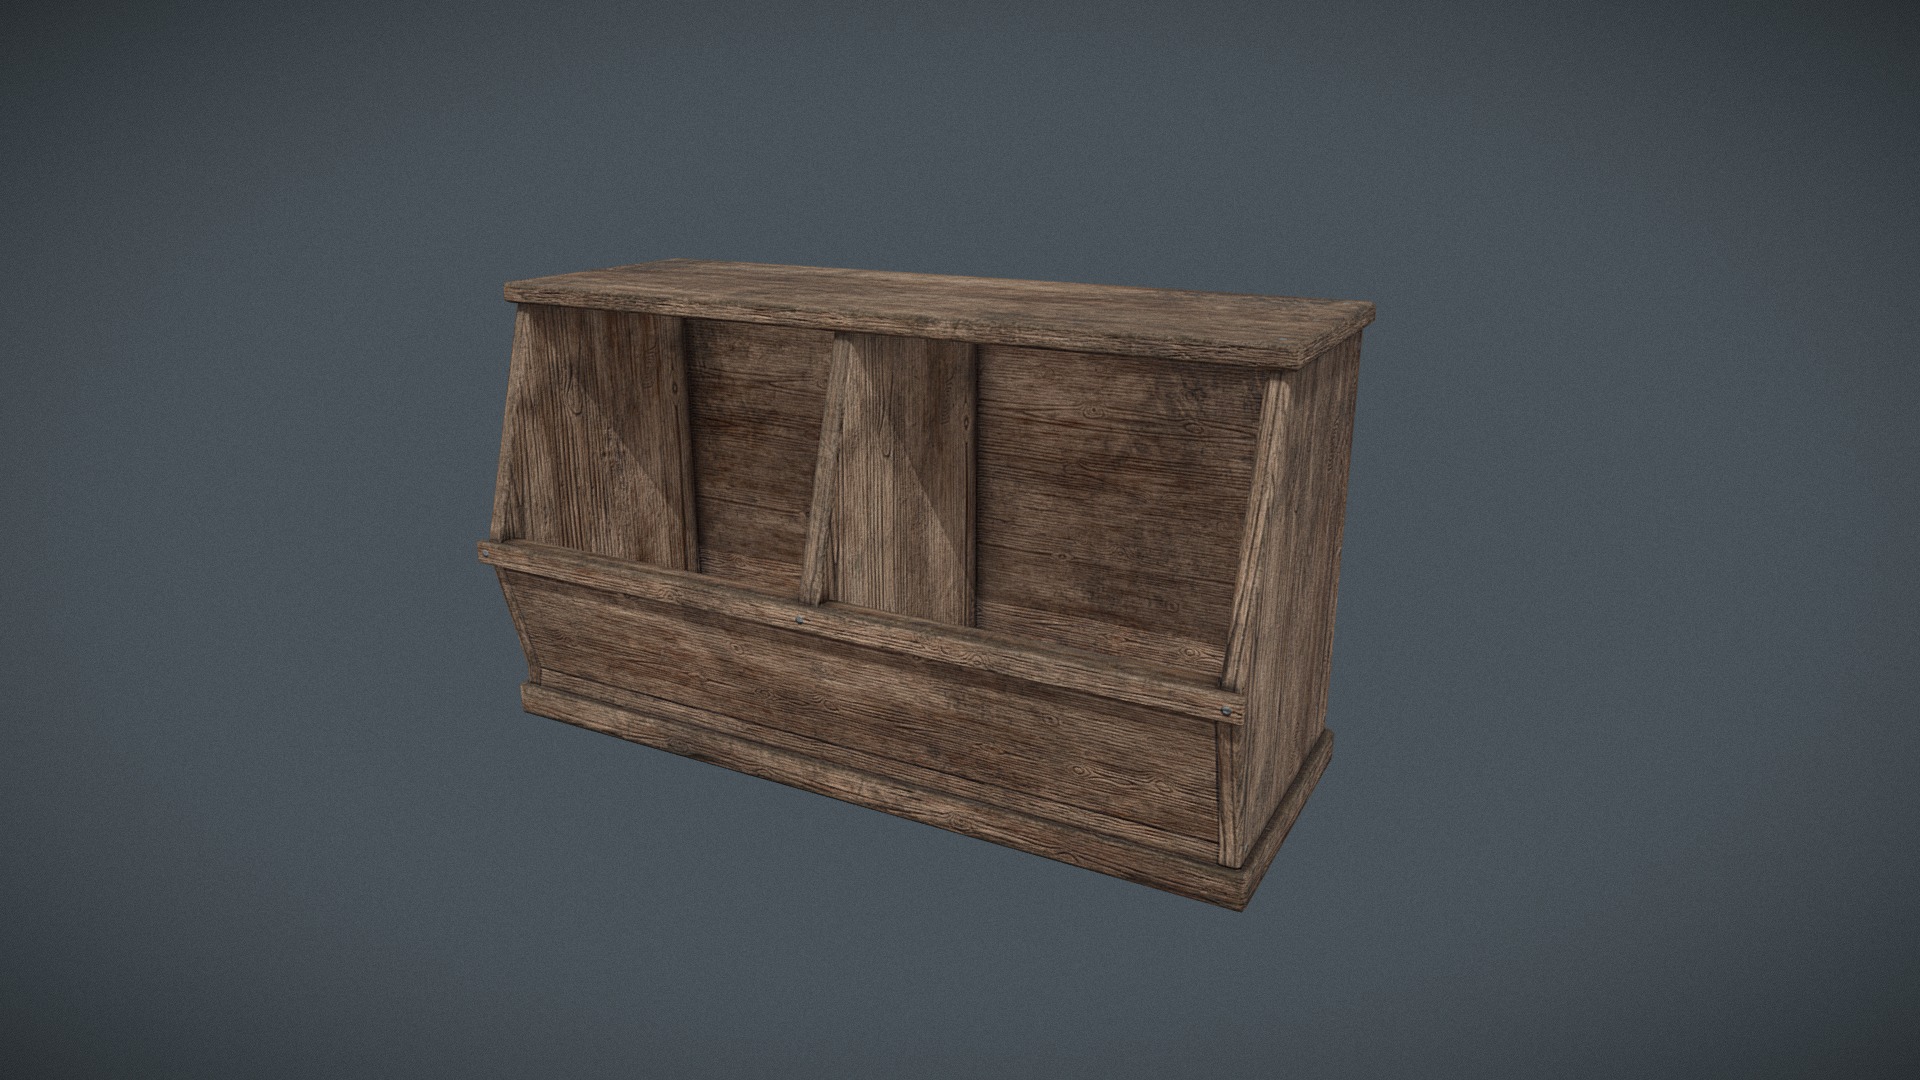 3D model Wooden Storage Bin - This is a 3D model of the Wooden Storage Bin. The 3D model is about a wooden box on a grey background.